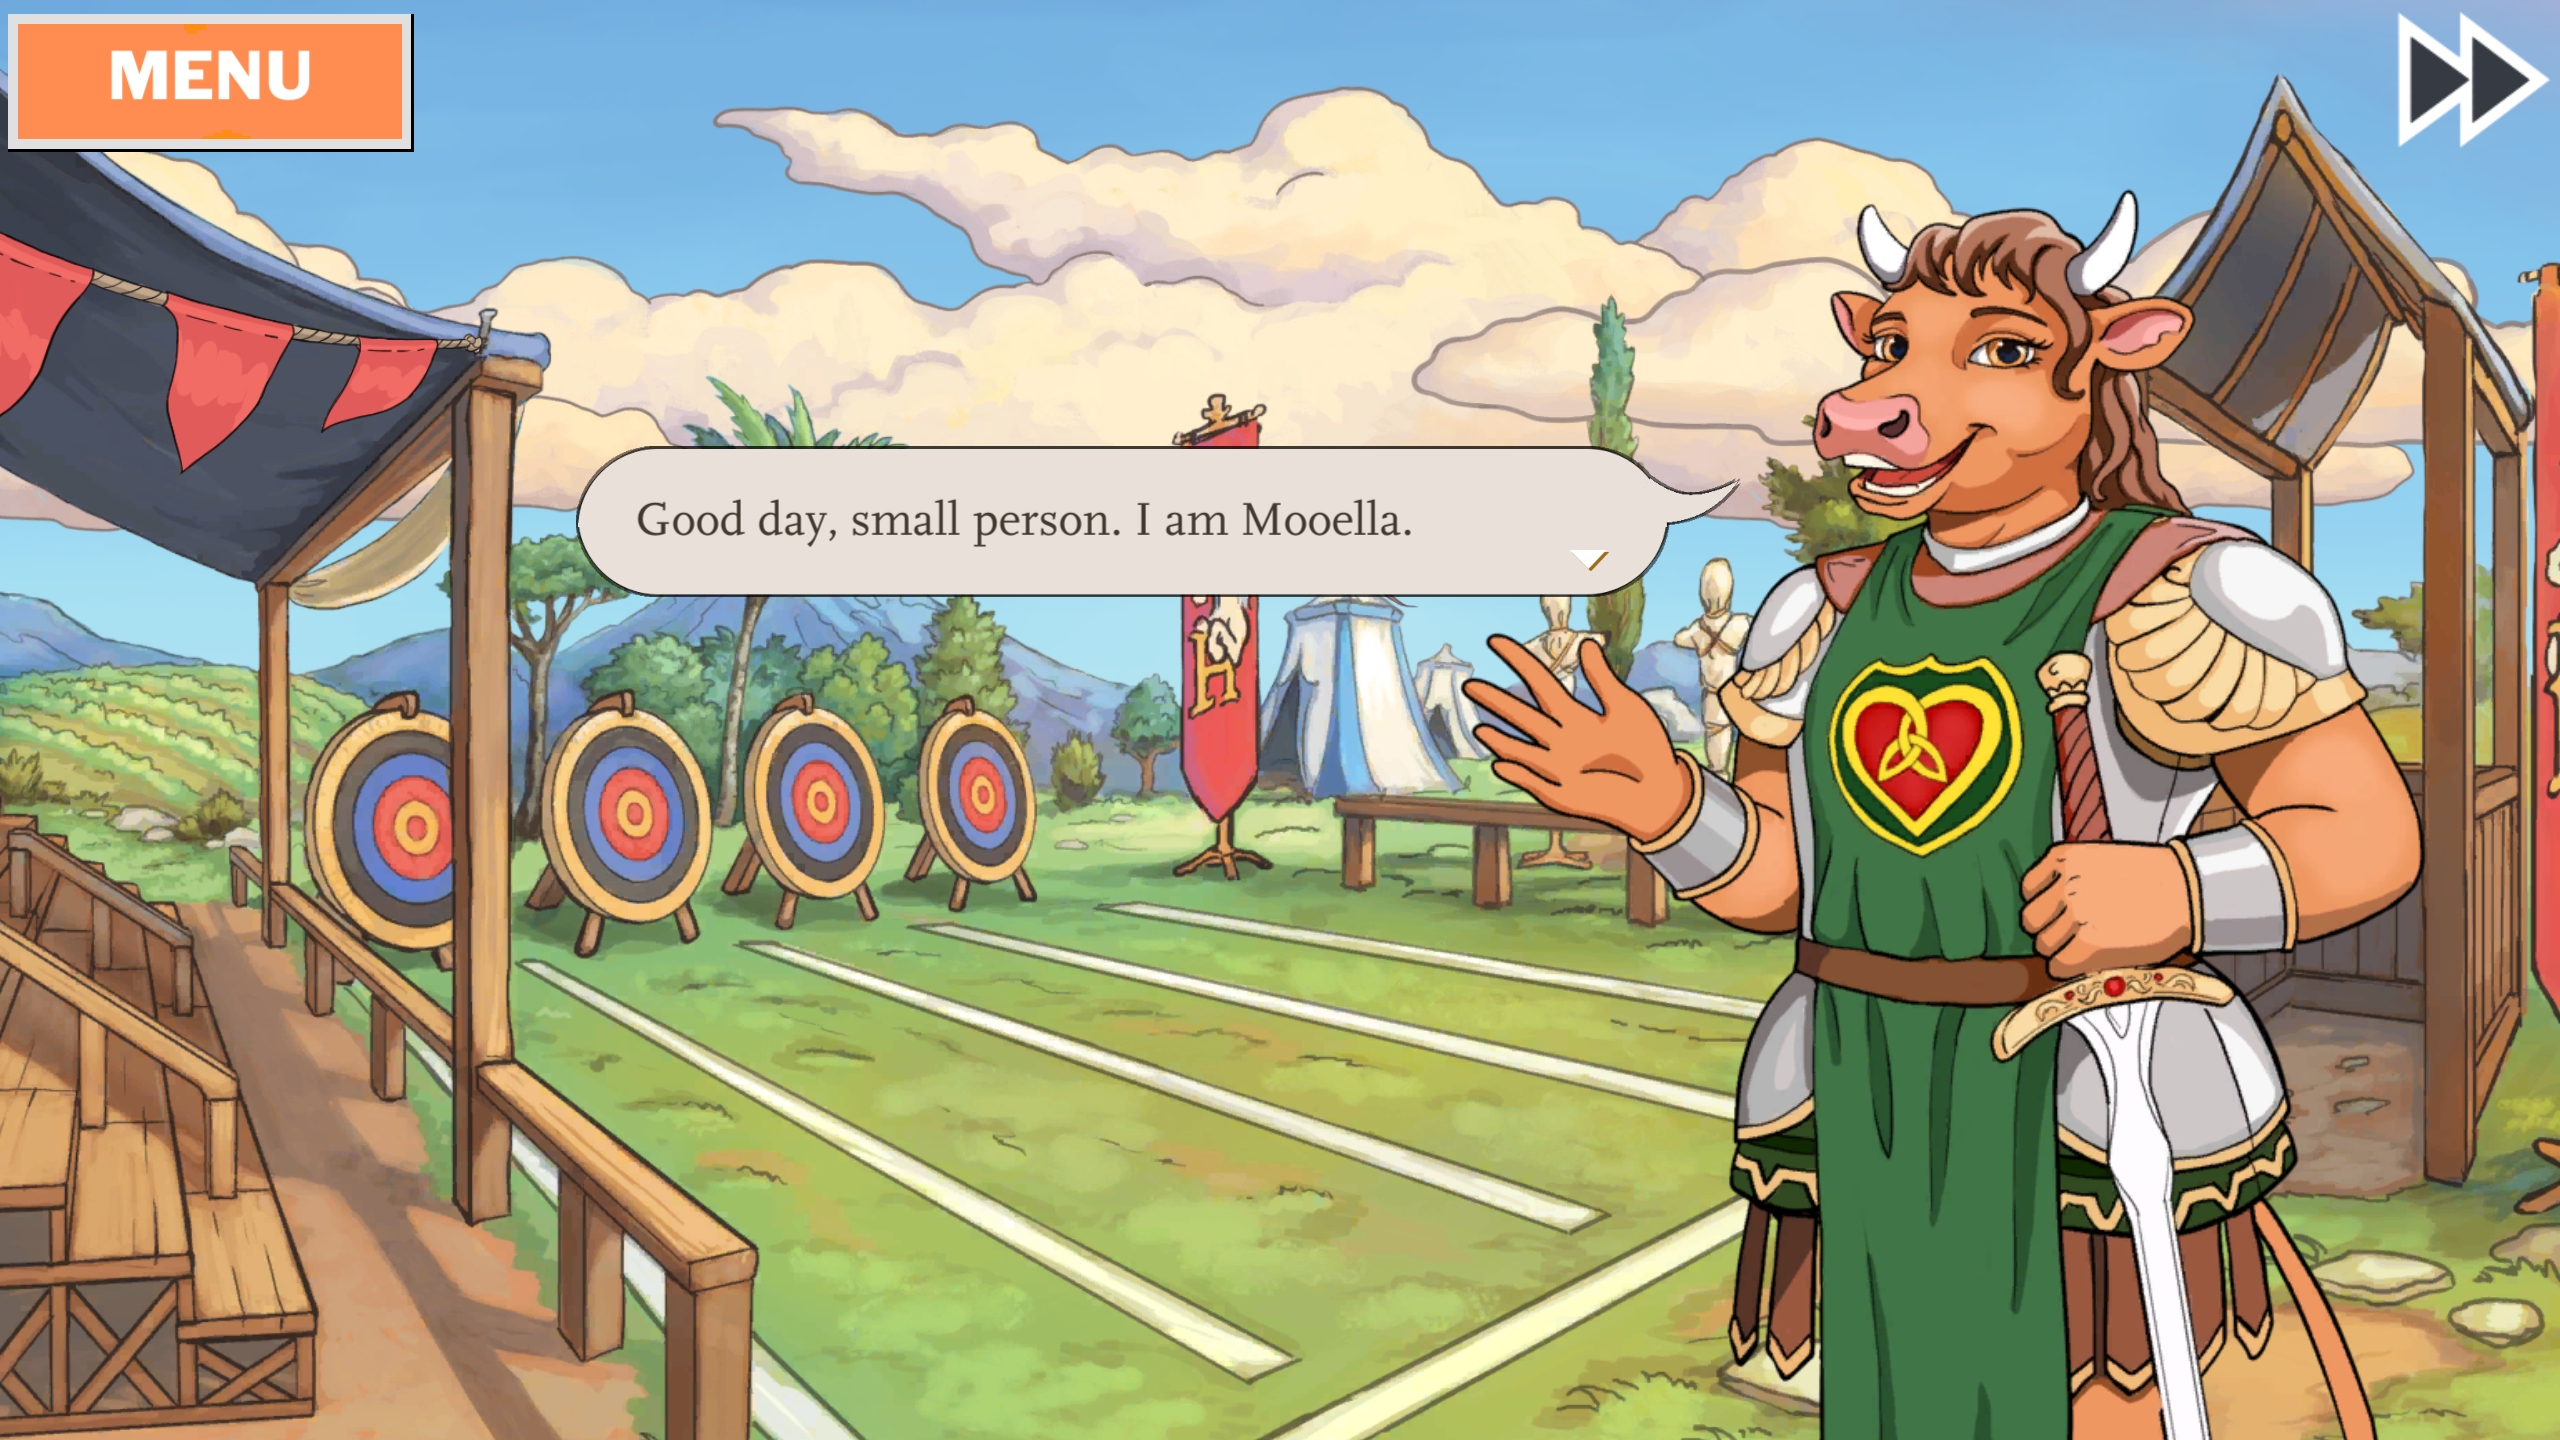 A minotaur paladin introduces herself as Mooella